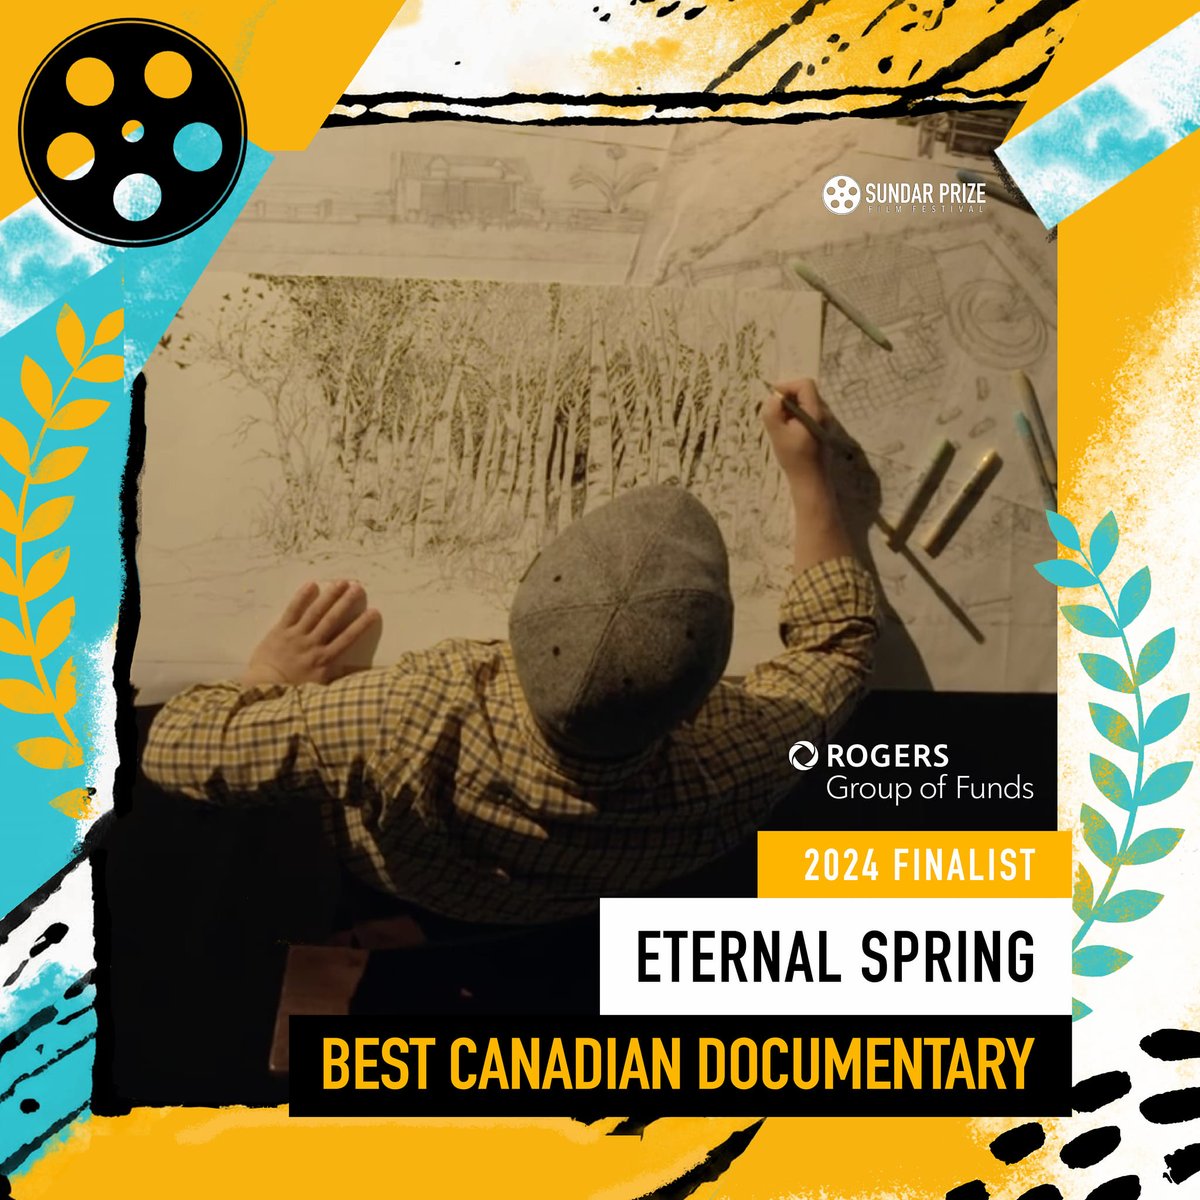 The Eternal Spring team is incredibly humbled to receive the great honour of winning the inaugural @SundarPrize Best Canadian Documentary sponsored by #RogersGroupOfFunds! It is an incredible recognition amongst all of the fantastic fellow nominees.